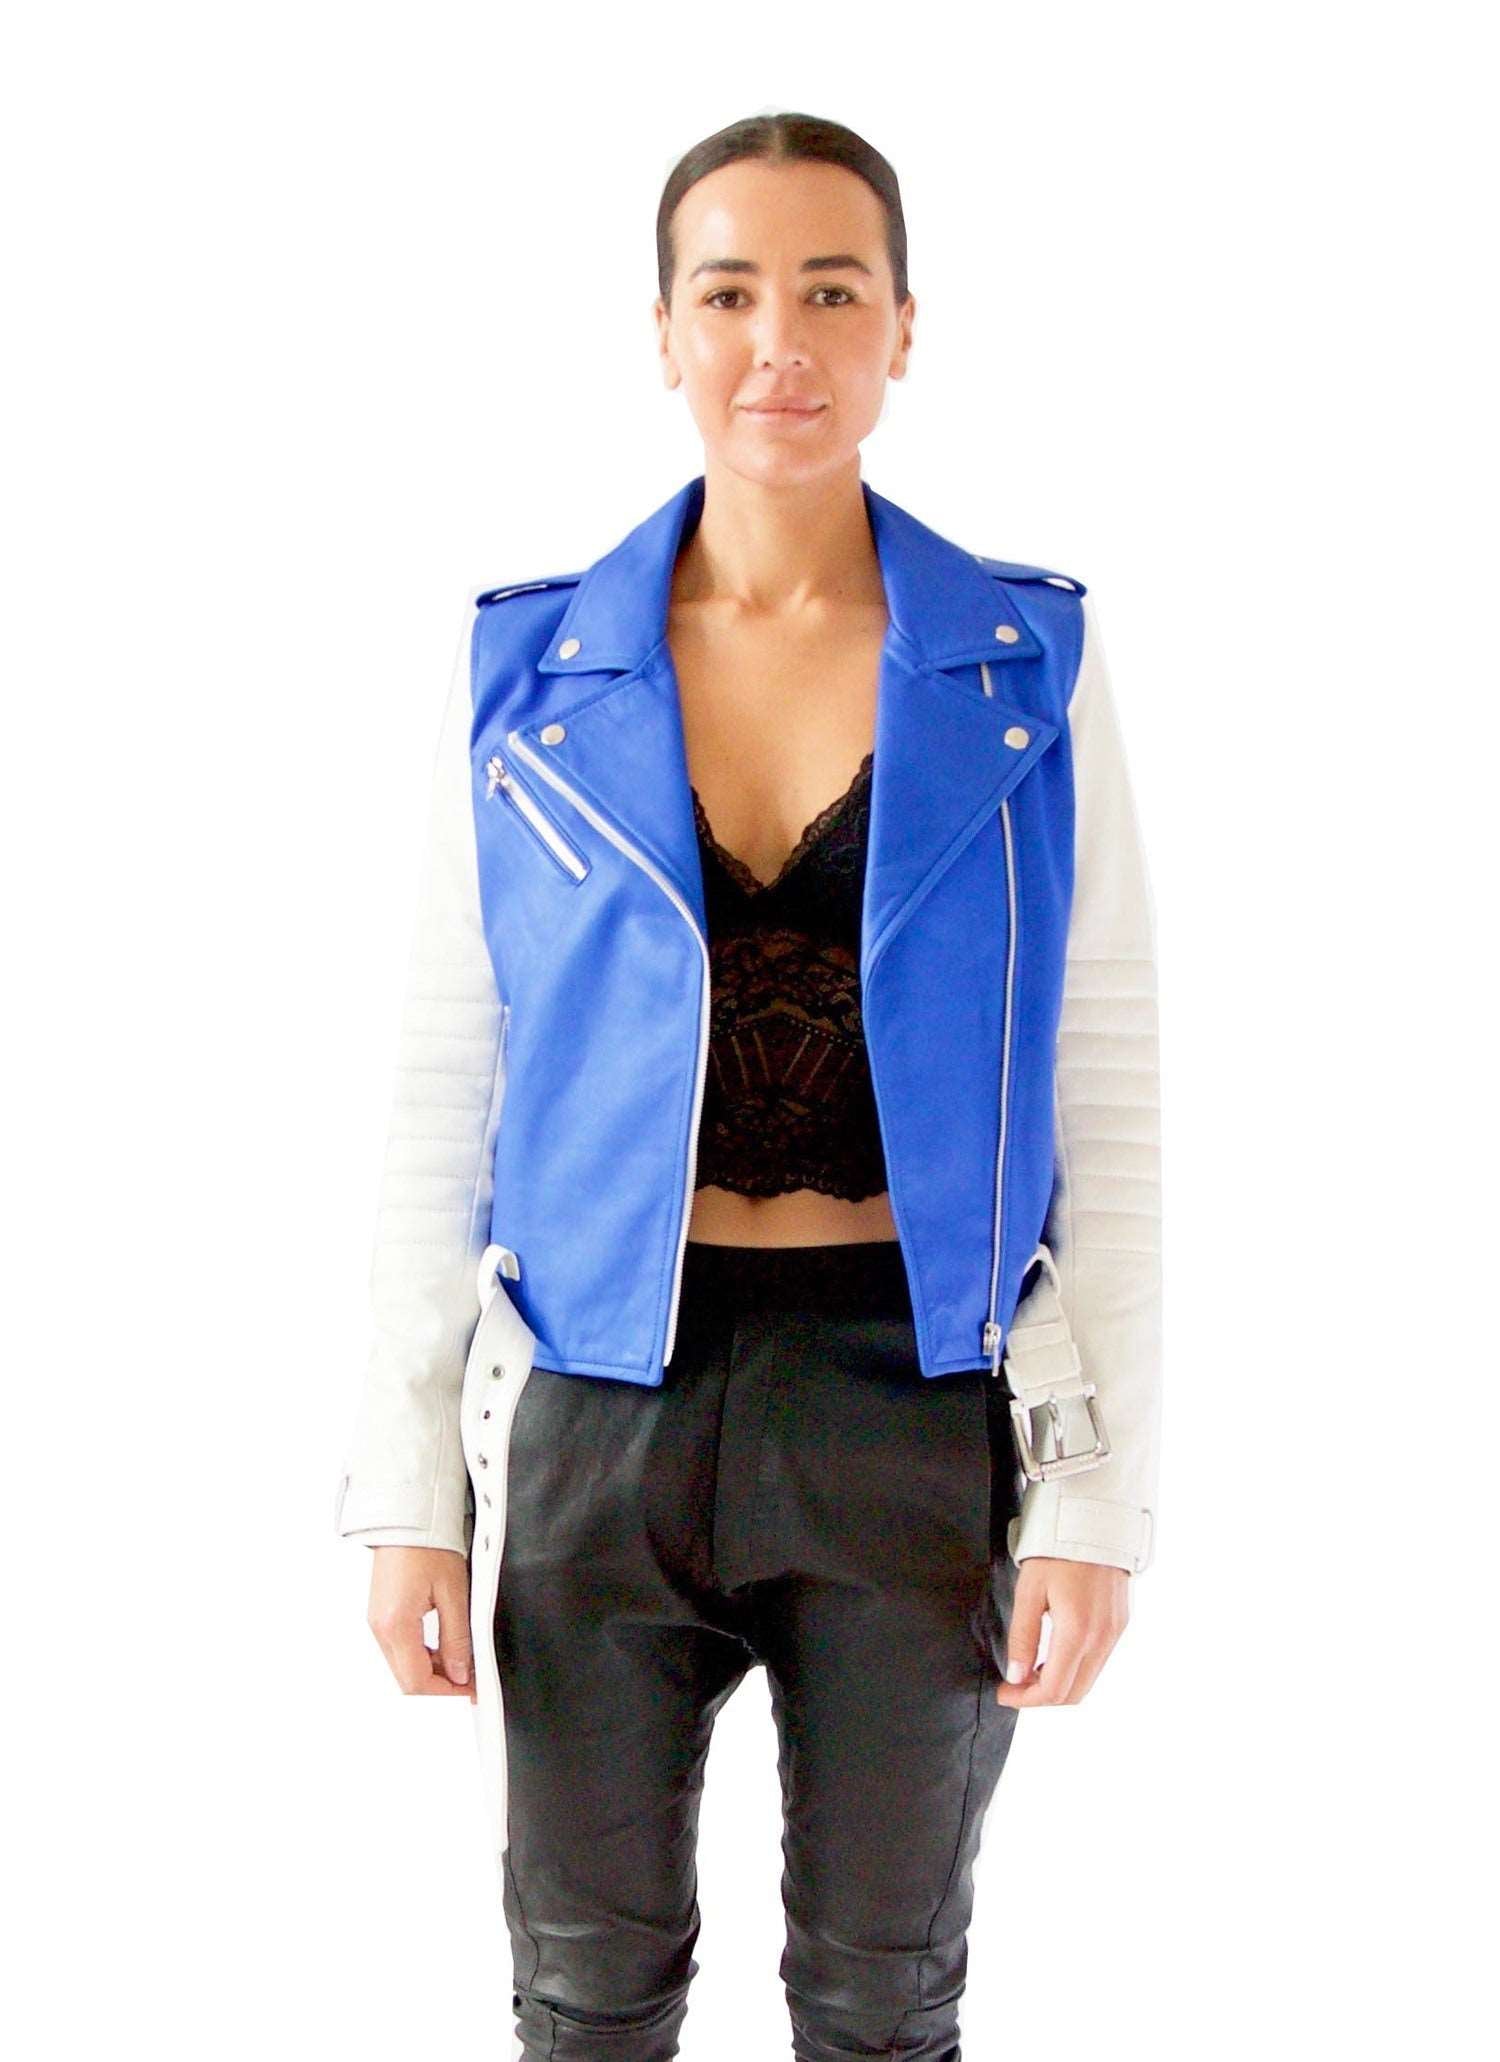 Blue Leather Carved Biker Jacket - Blue and White